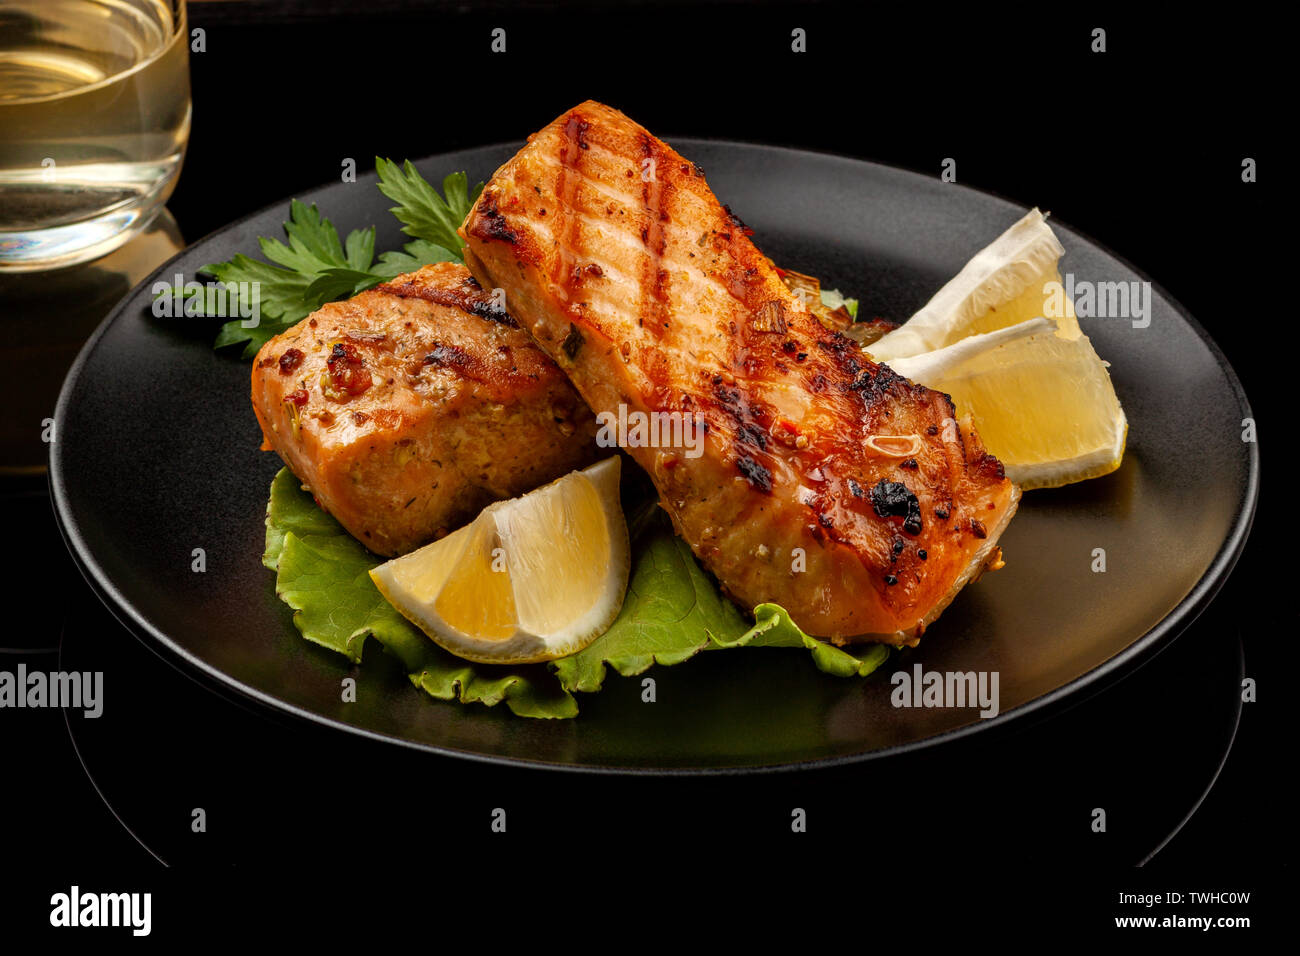 https://c8.alamy.com/comp/TWHC0W/fish-trout-chum-salmon-humpback-a-piece-baked-grilled-with-a-slice-of-lemon-and-lettuce-TWHC0W.jpg